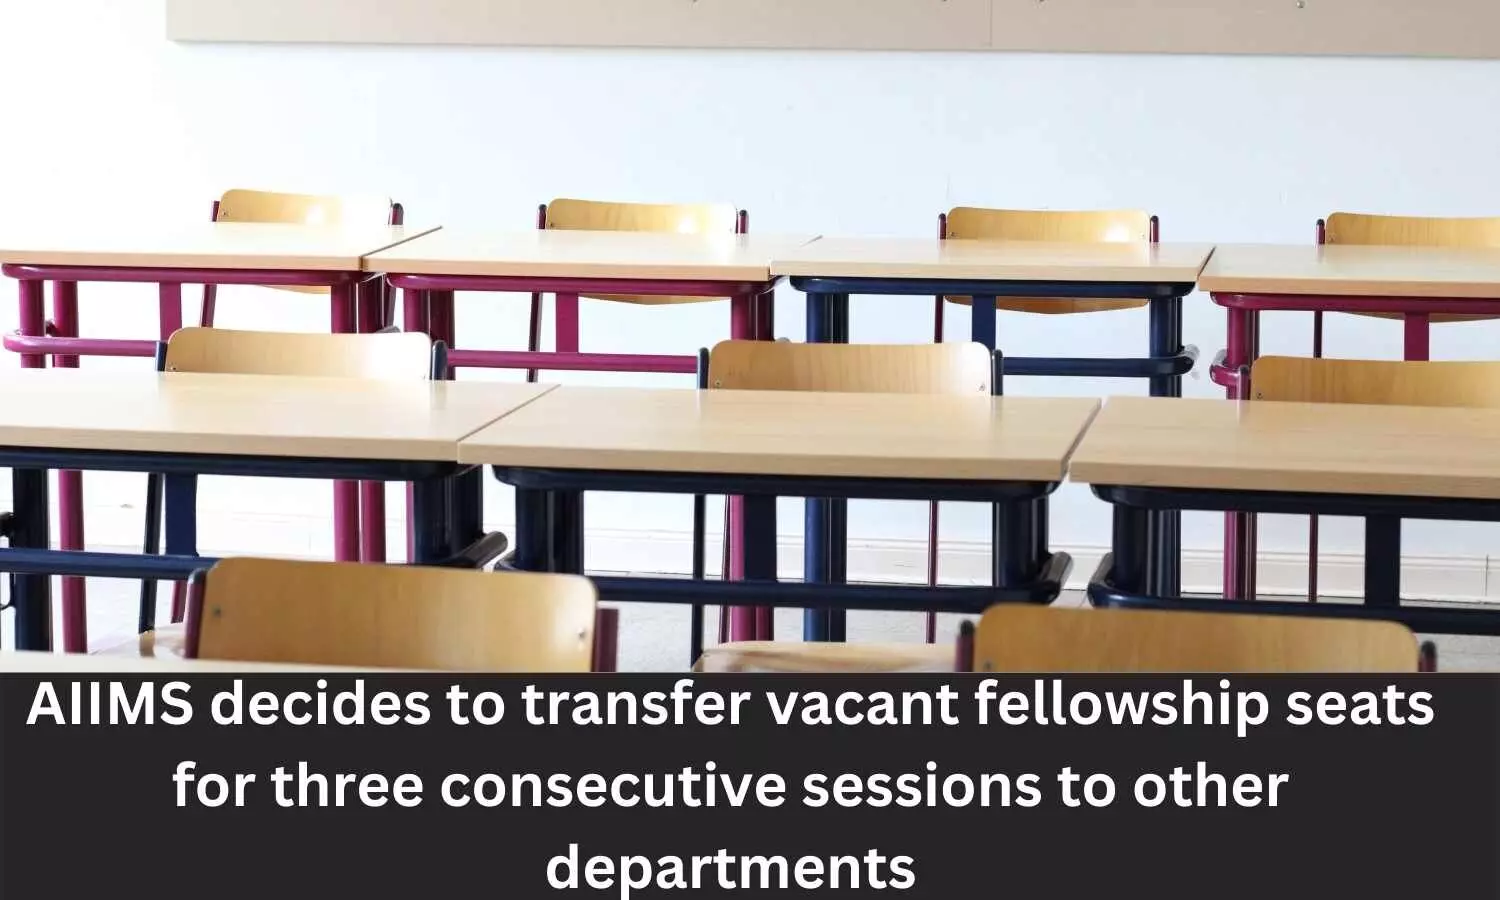 AIIMS Delhi decides to transfer vacant fellowship seats for 3 consecutive sessions to other departments